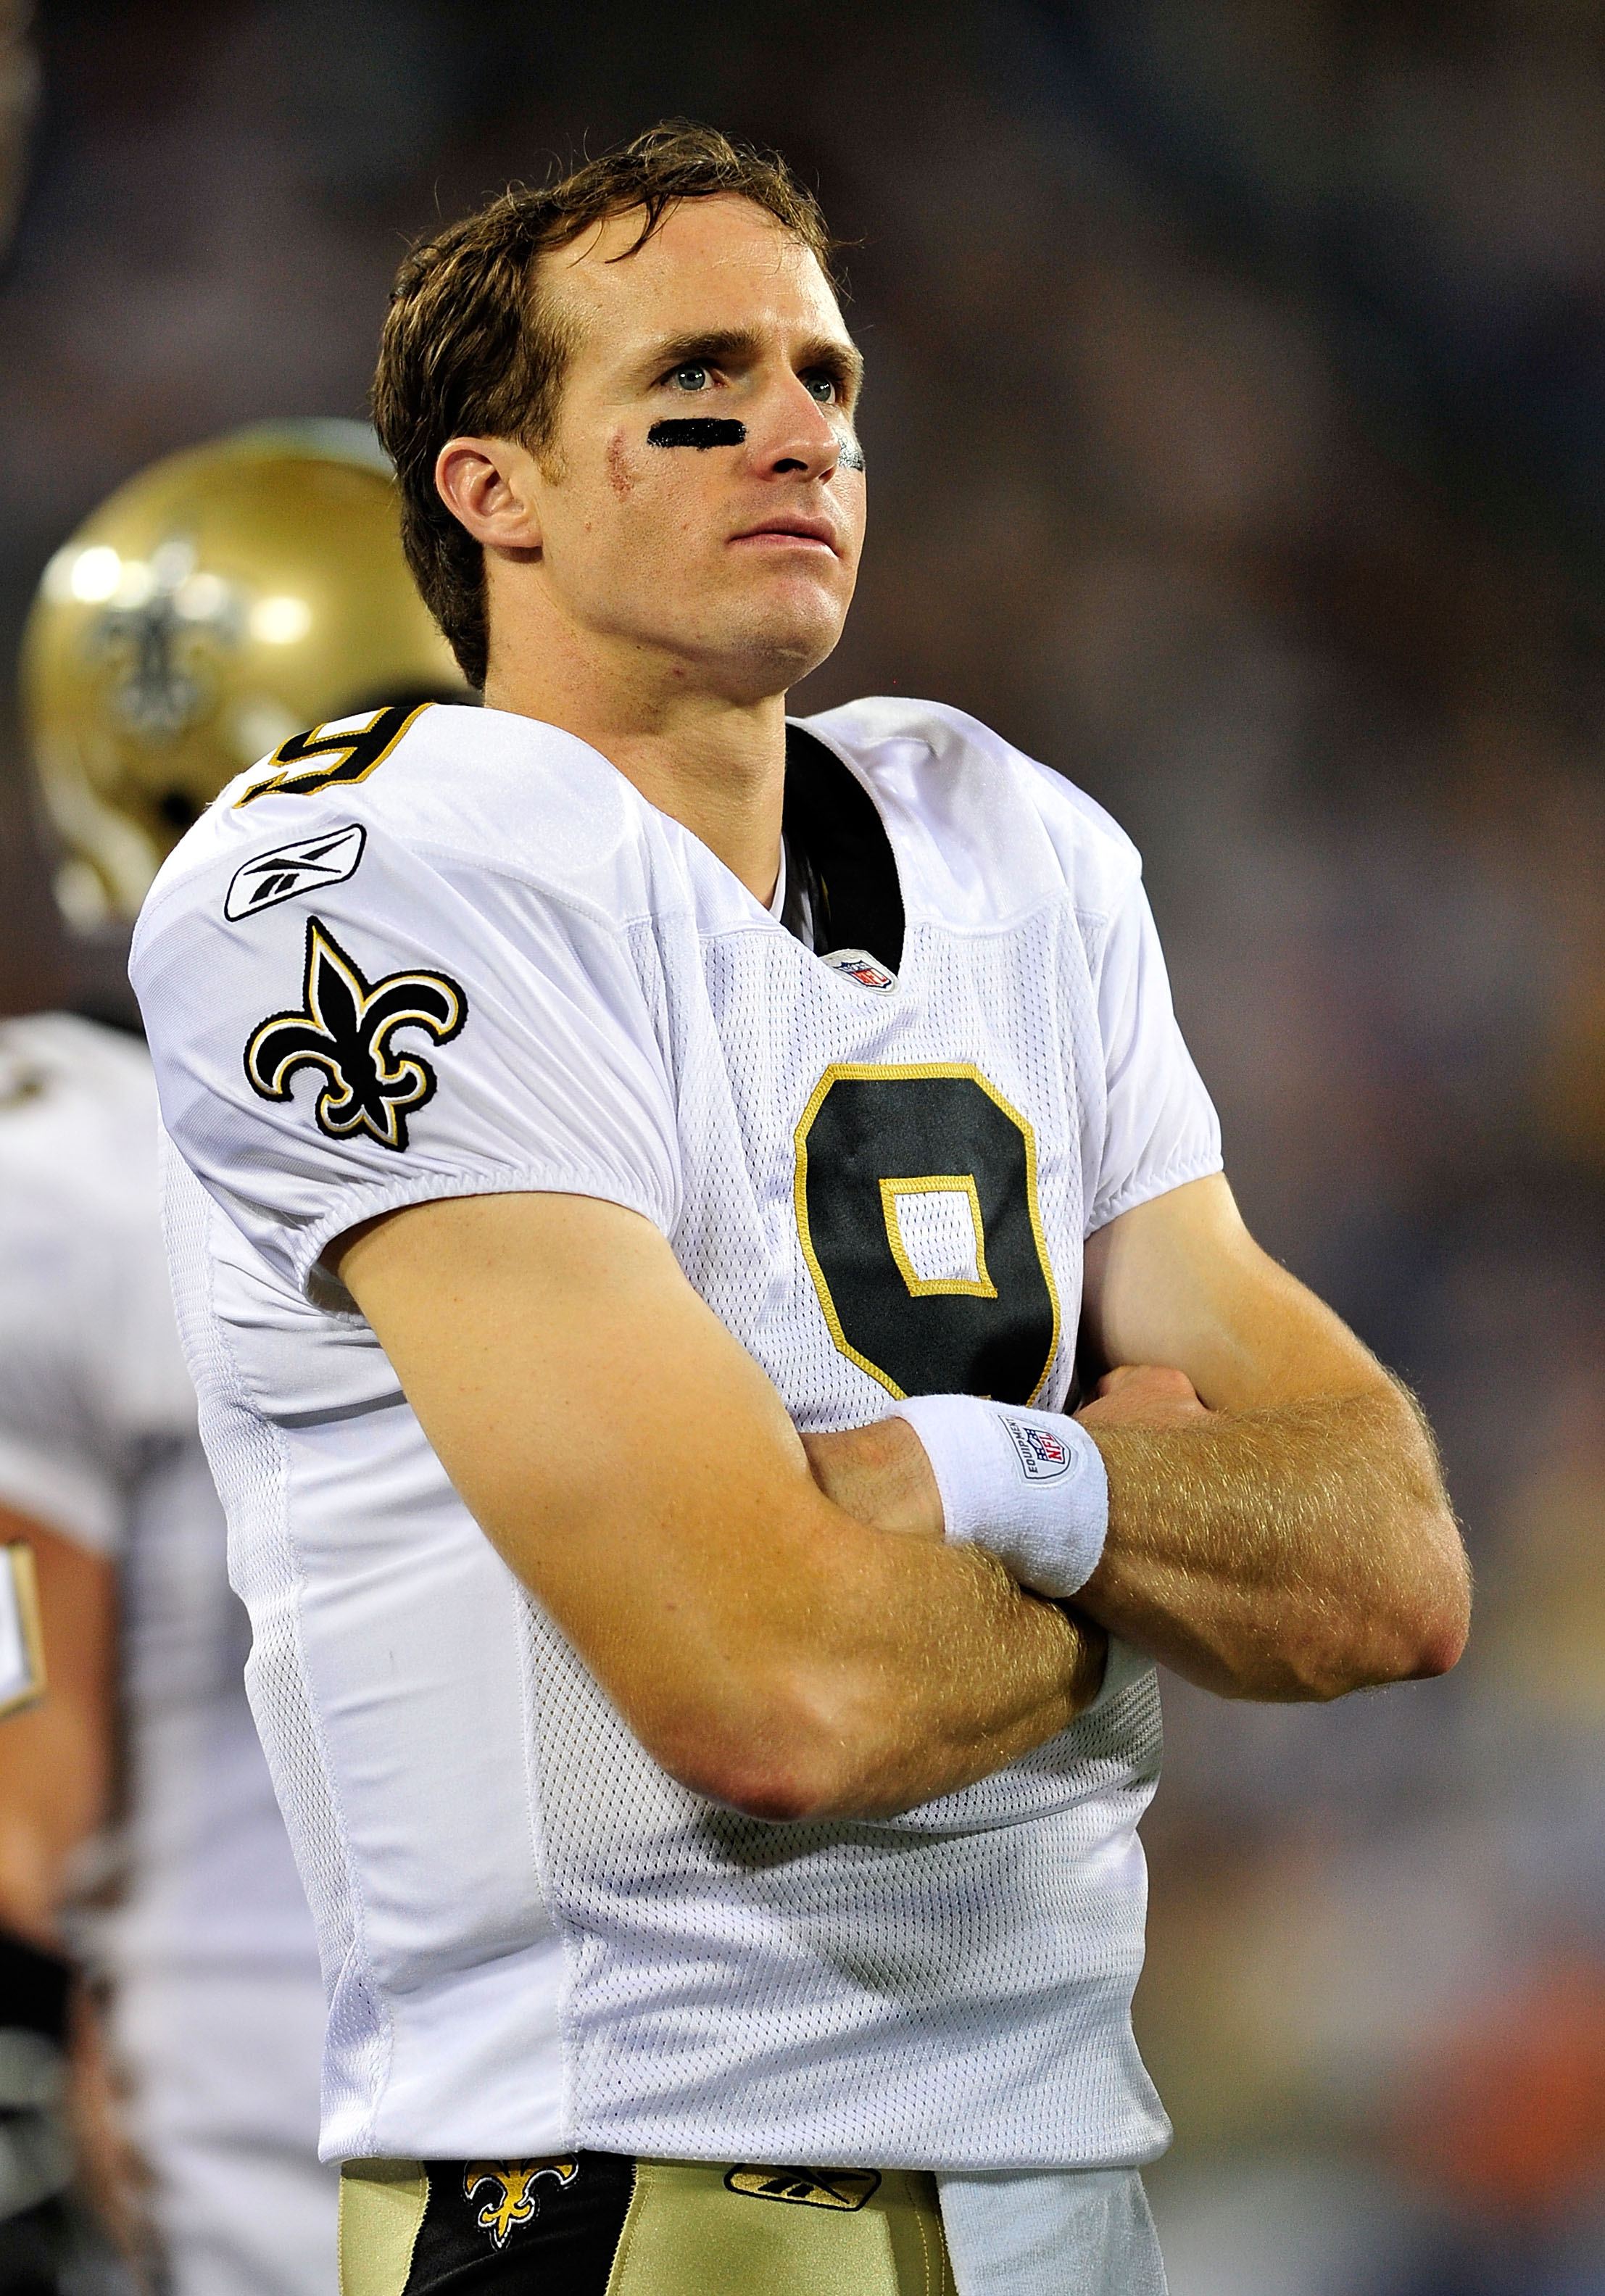 NASHVILLE, TN - SEPTEMBER 02:  Quarterback Drew Brees #9 of the New Orleans Saints, who did not play, watches during an exhibition game against the Tennessee Titans at LP Field on September 2, 2010 in Nashville, Tennessee. Tennessee won 27-24.  (Photo by 